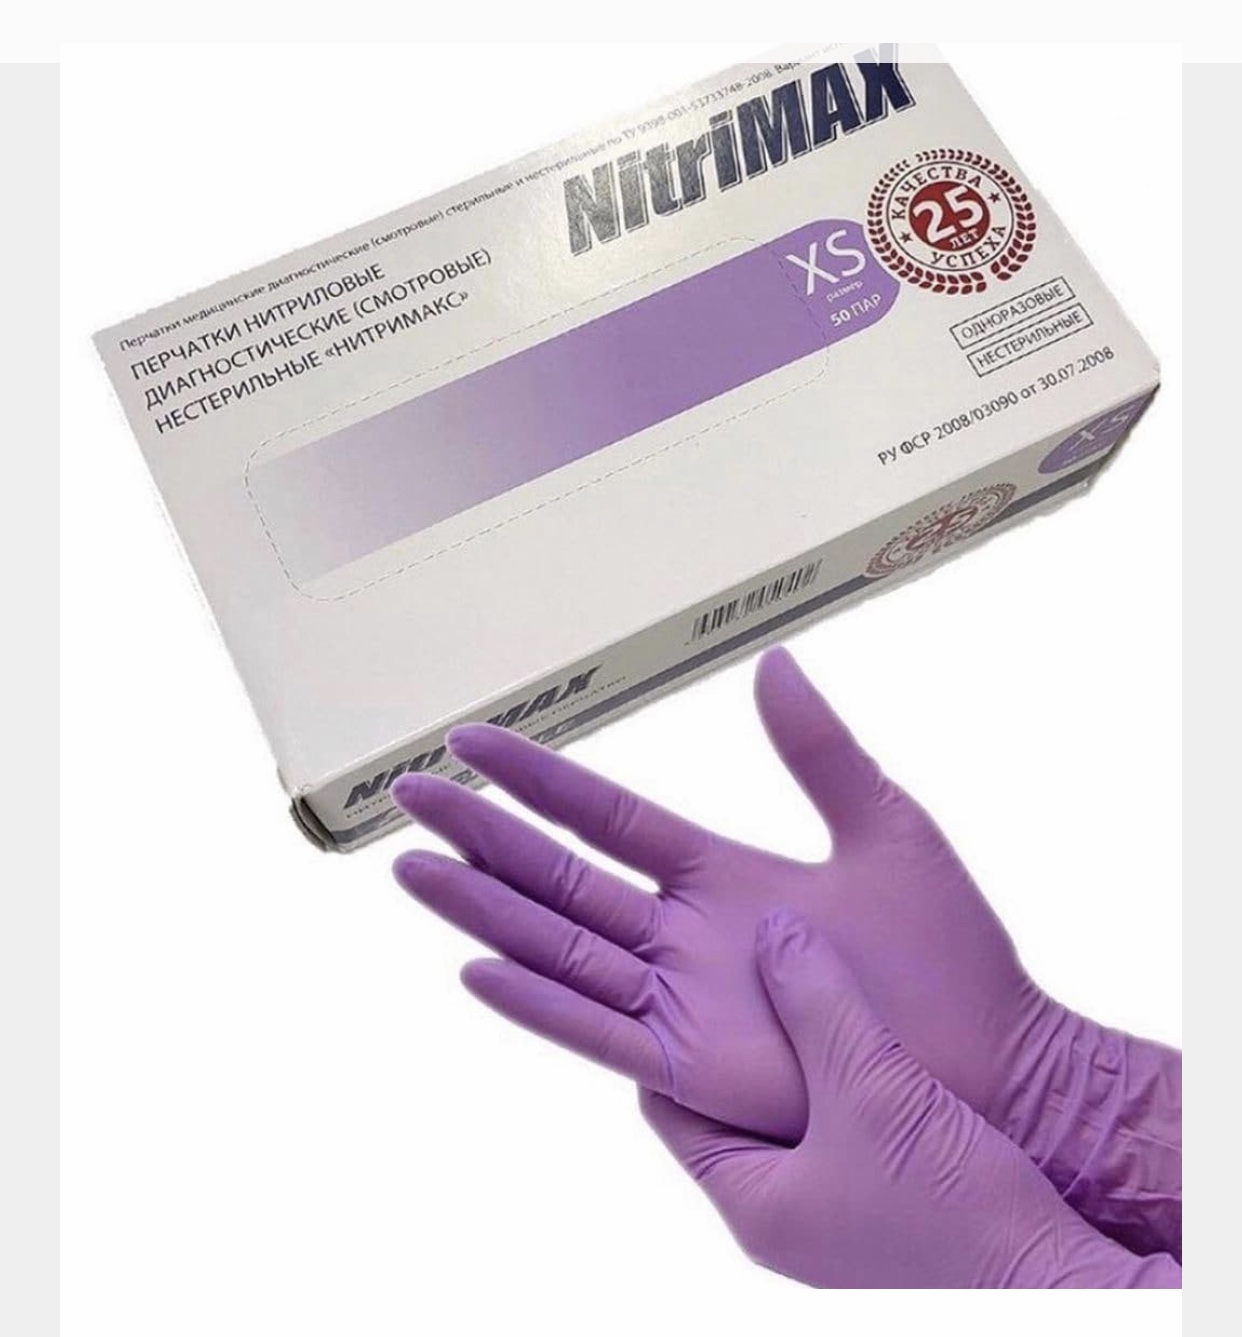 <p>We are looking for wholesale suppliers of nitrile and latex gloves. The purchase volume is 10 boxes.</p>

<p>(translated from russian)</p>